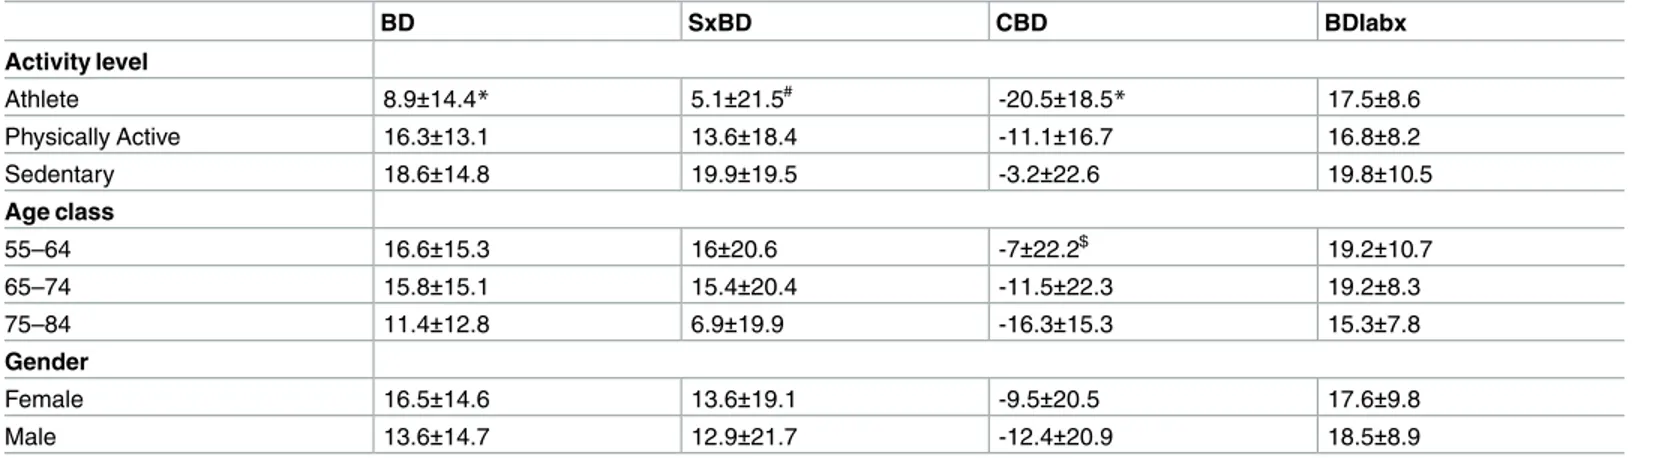 Table 2. BIDA indexes in relation to activity level, age class, and gender (mean ± SD).